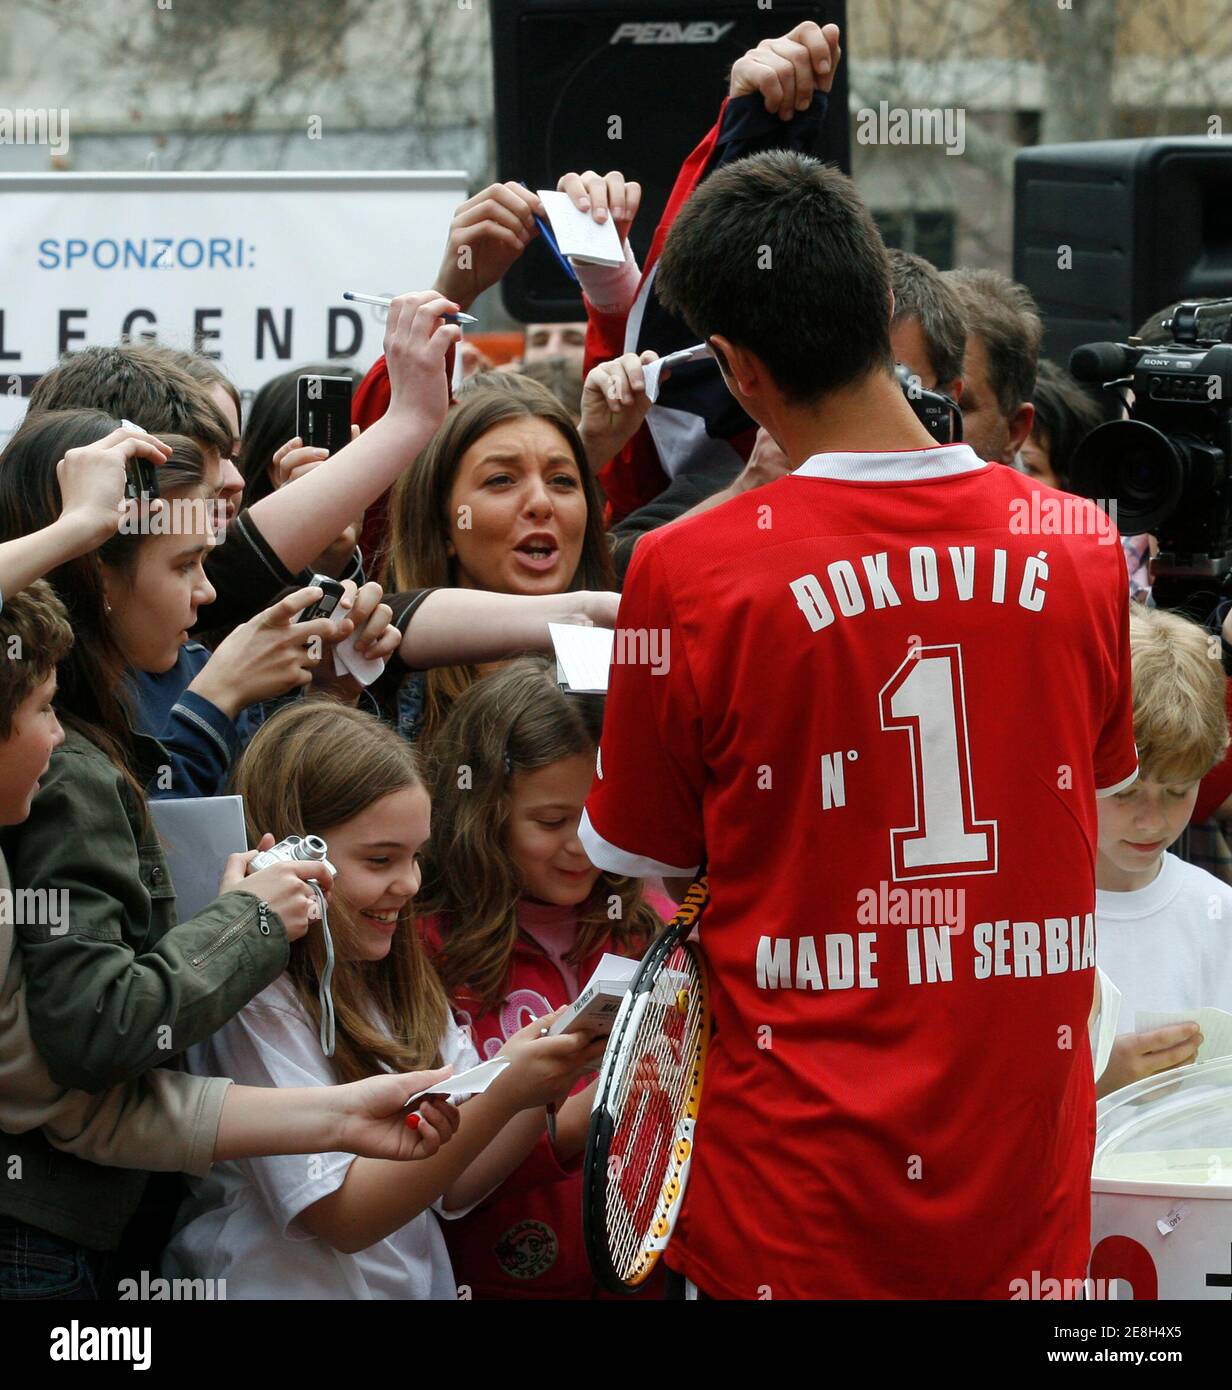 Serbia's tennis player Novak Djokovic signs autographs at an exhibition tennis match in the center of Belgrade April 4, 2007. Djokovic will be playing a Davis Cup match against Georgia on April 6, 2007. Djokovic became very popular in Serbia after victory at the Sony Ericsson Open tennis tournament in Key Biscayne earlier this month. REUTERS/Ivan Milutinovic (SERBIA) Stock Photo